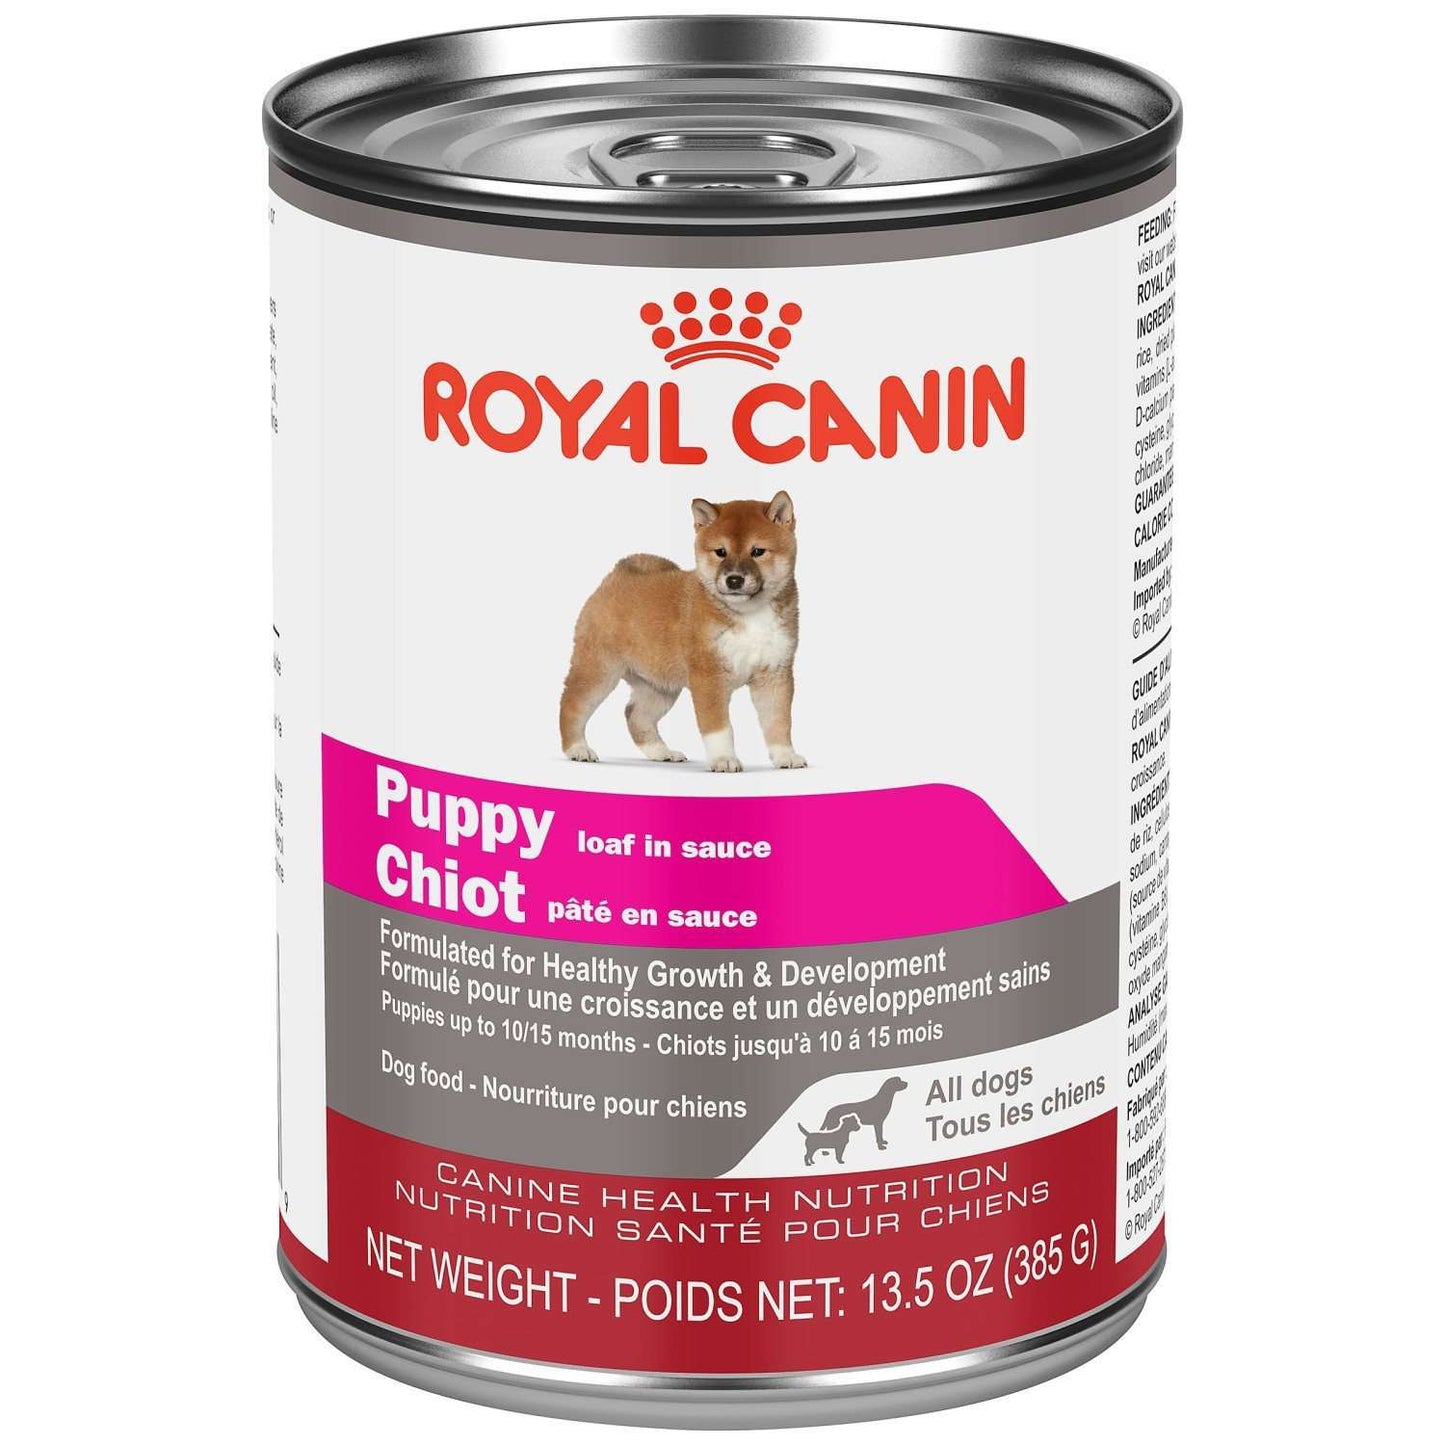 Royal Canin Canned Puppy Food 385g  Canned Dog Food  | PetMax Canada